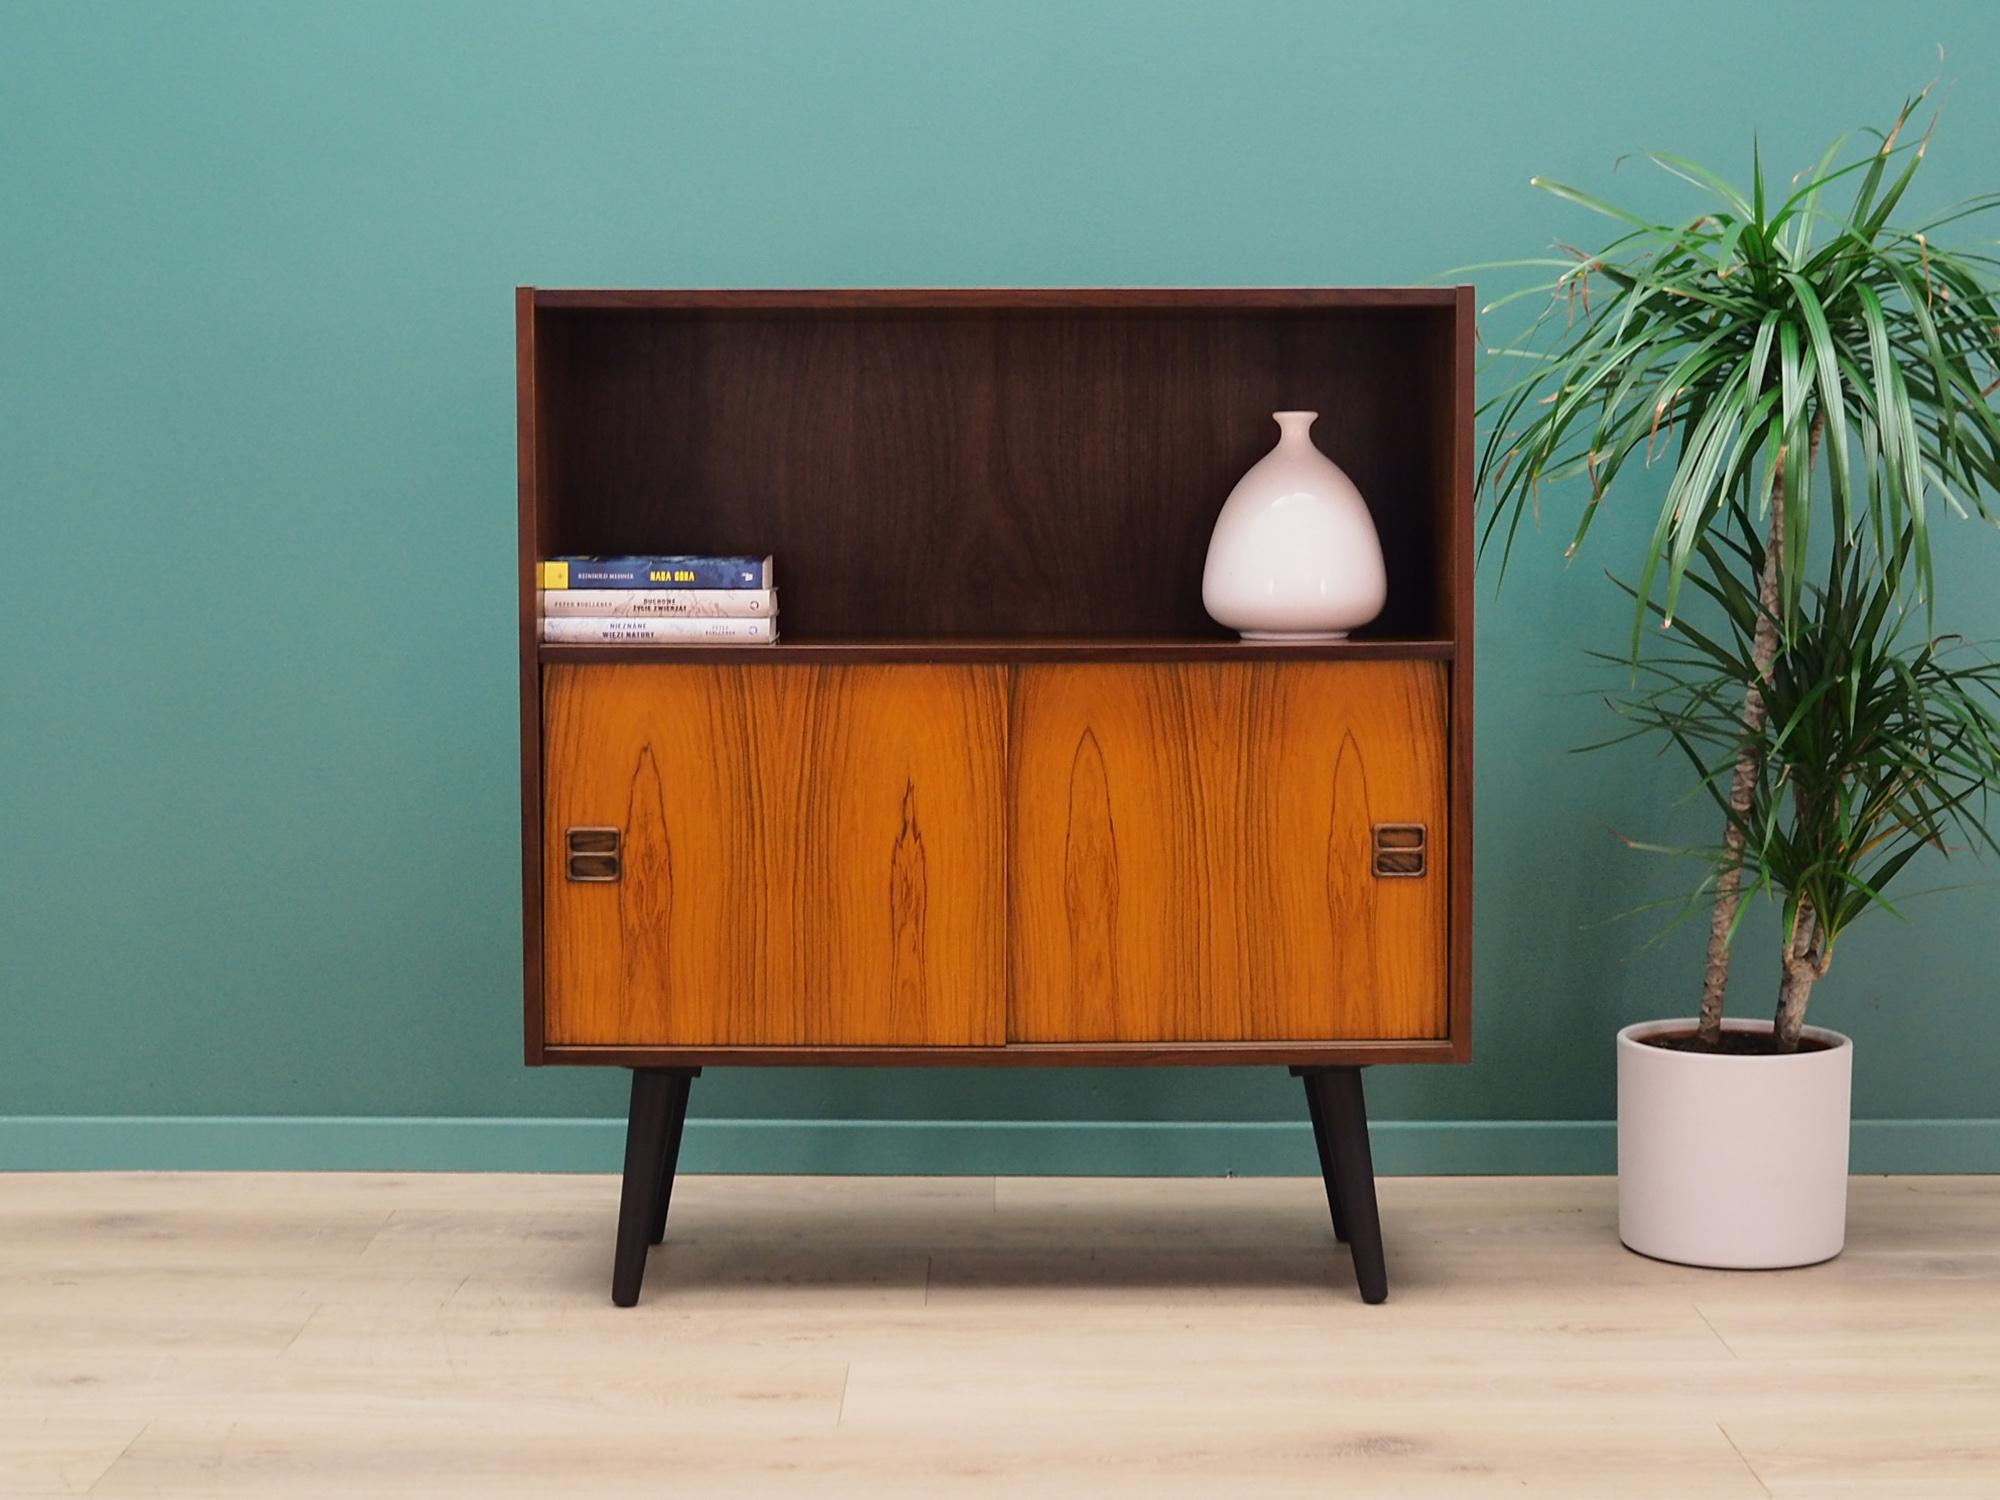 The chest of drawers was made in the 1960s-1970s, produced in Denmark.

The construction is covered with rosewood veneer. Legs made of solid wood stained black. The surface after refreshing. Inside the space has been filled with a practical shelf